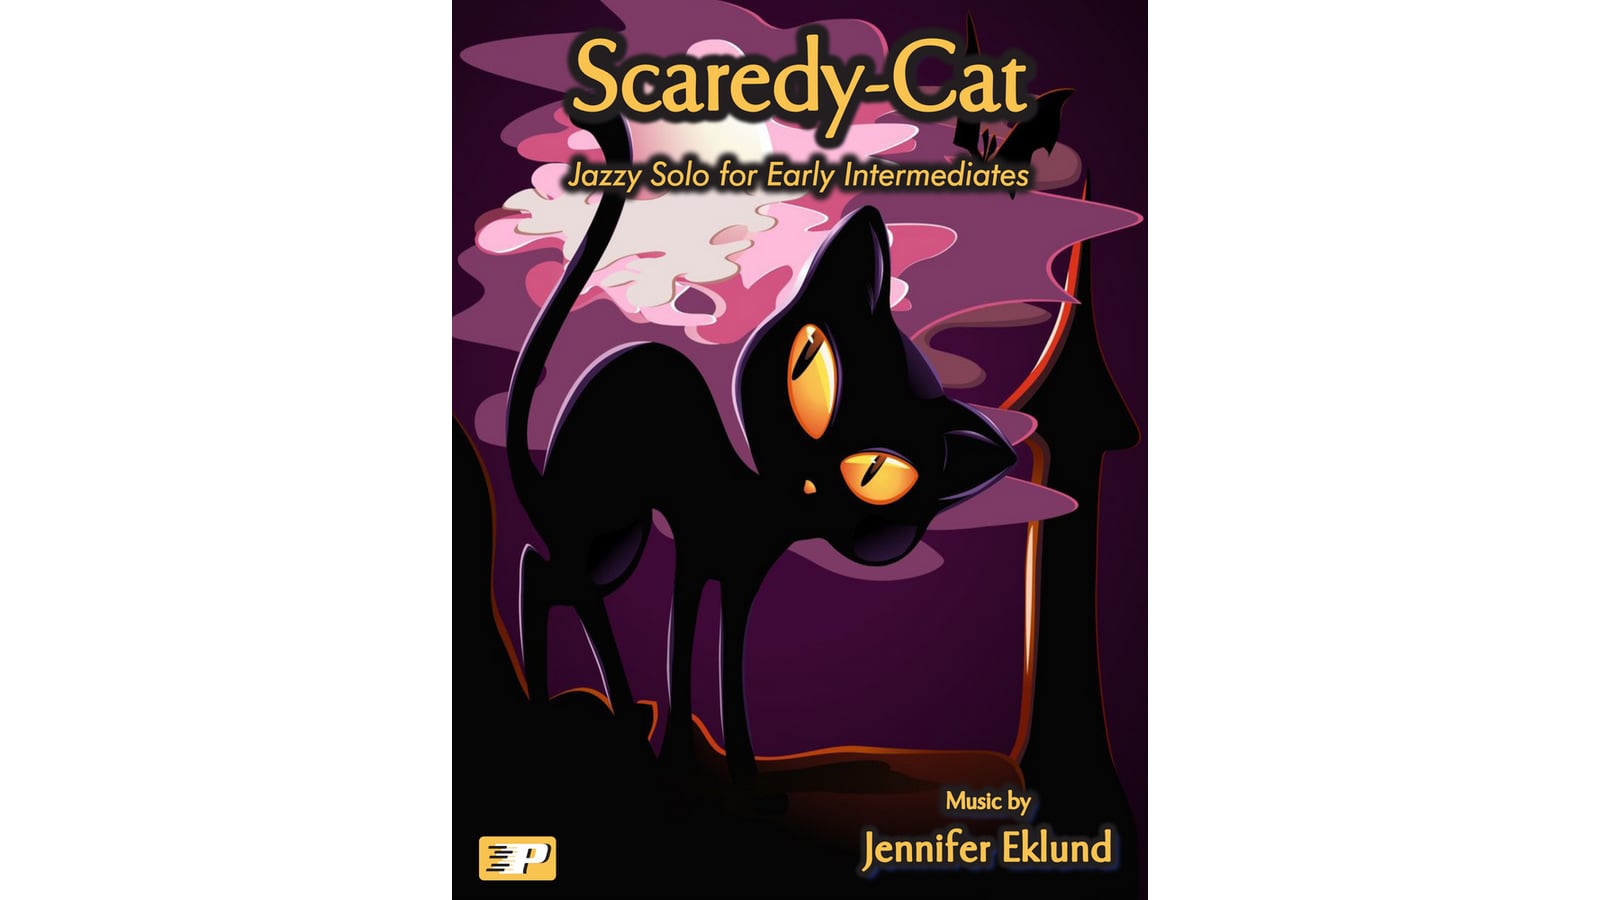 Scaredy Cats Episode 39: The Woman In Black (2012) by Scaredy Cats